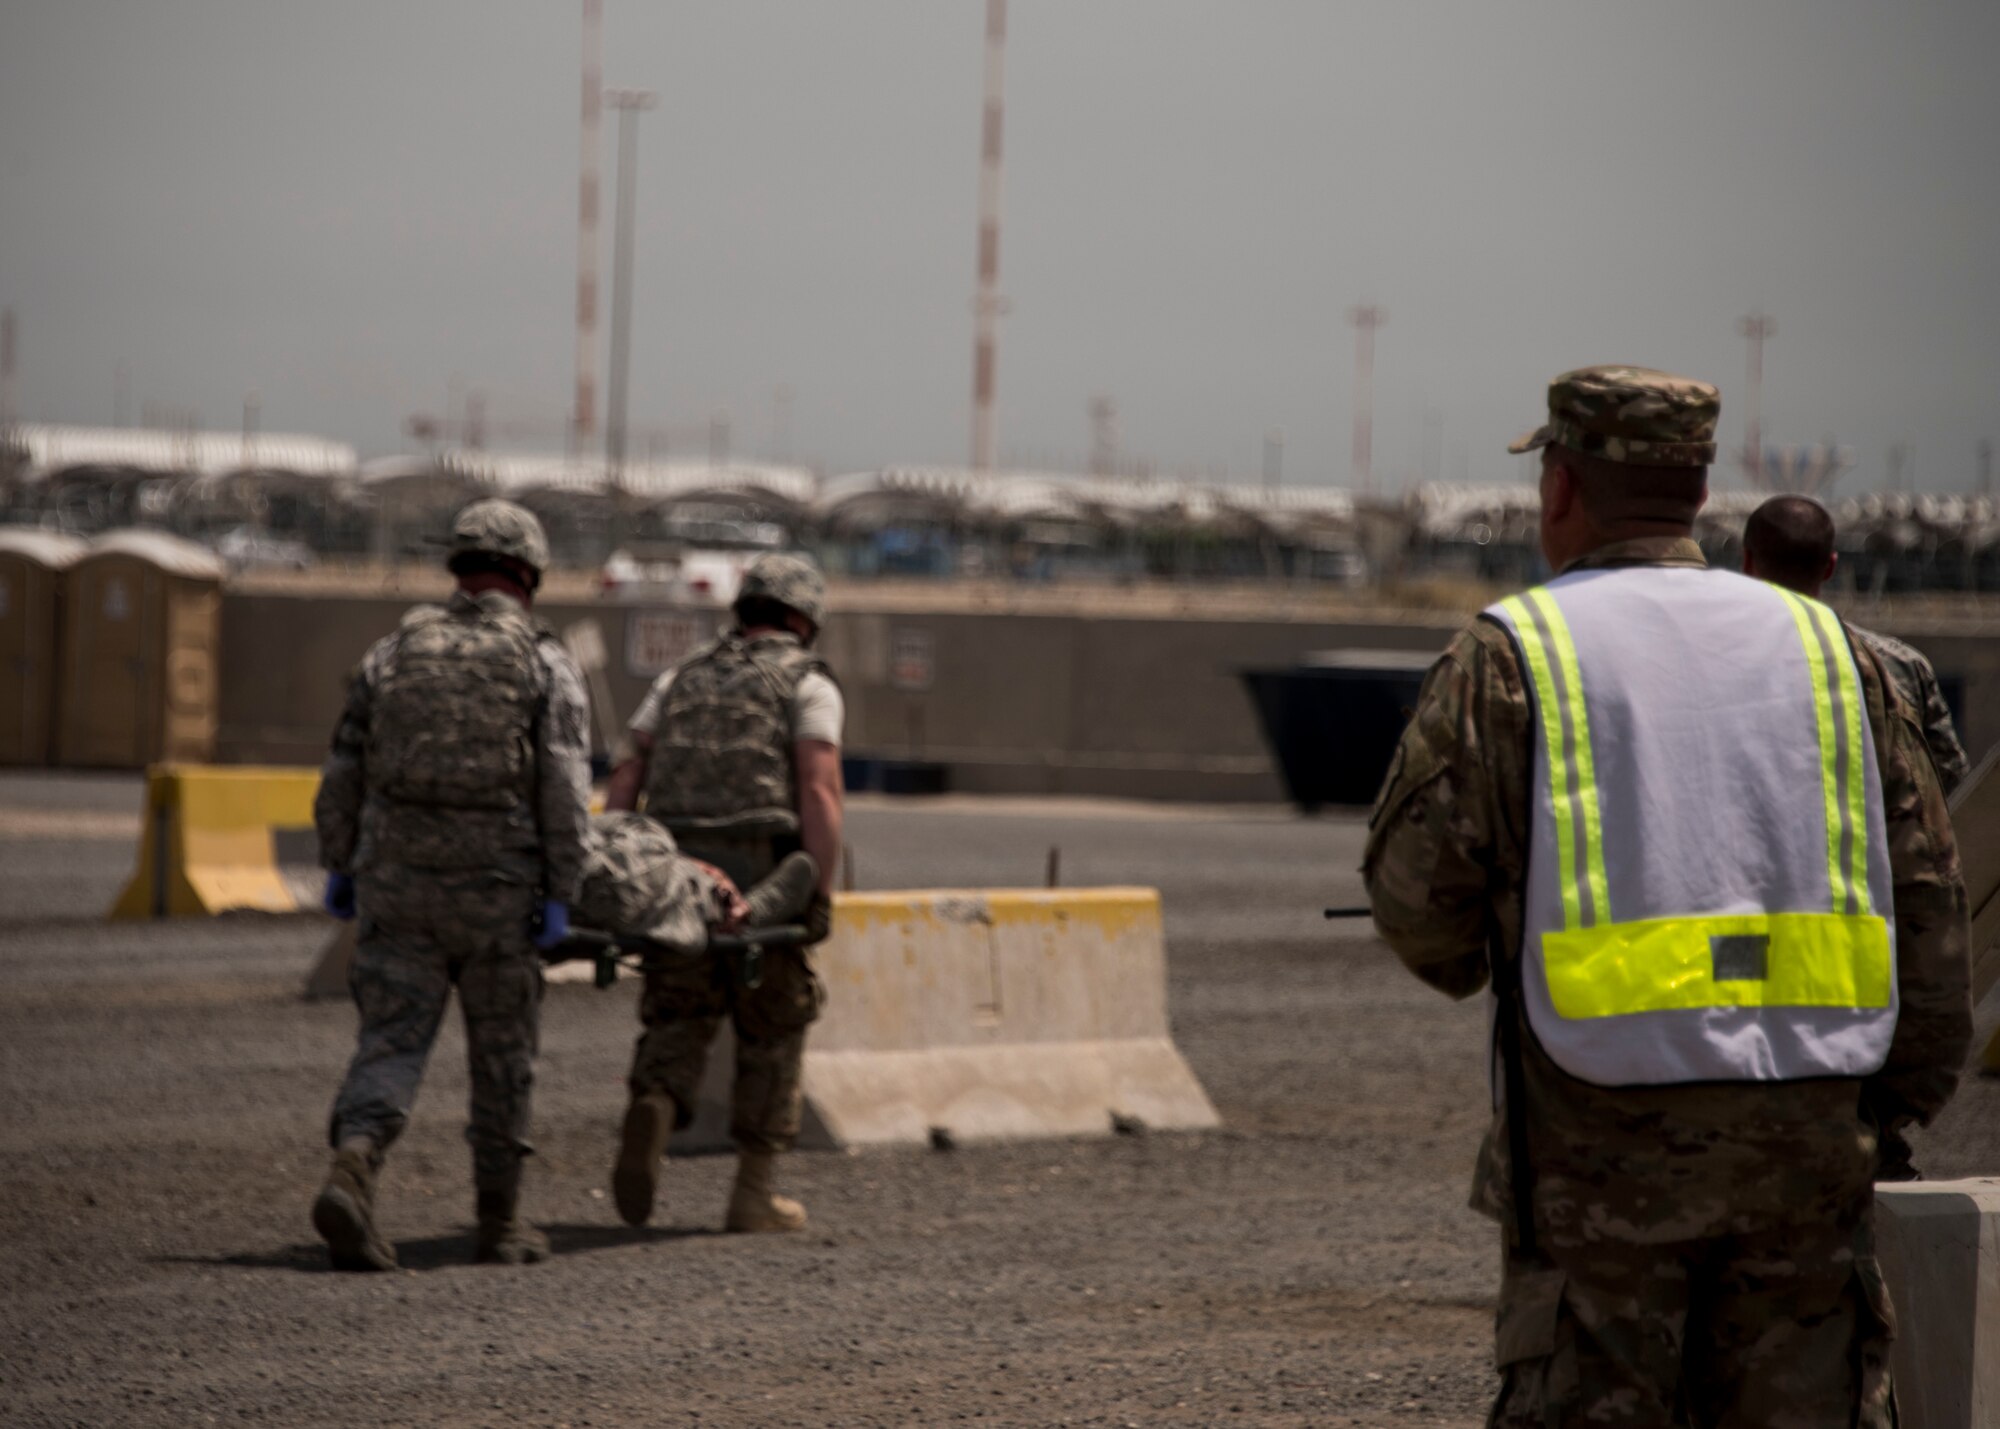 Members of the 387th Expeditionary Security Forces Squadron evacuate a simulated casualty after a vehicle borne improvised explosive device detonation as a wing inspection team member evaluates them during a force protection condition delta exercise at an undisclosed location in Southwest Asia, April 27, 2017. The 387th Air Expeditionary Group conducted a force protection condition delta exercise to demonstrate base defense capabilities in response to increased terrorist threat levels. (U.S. Air Force photo/ Tech. Sgt. Jonathan Hehnly)